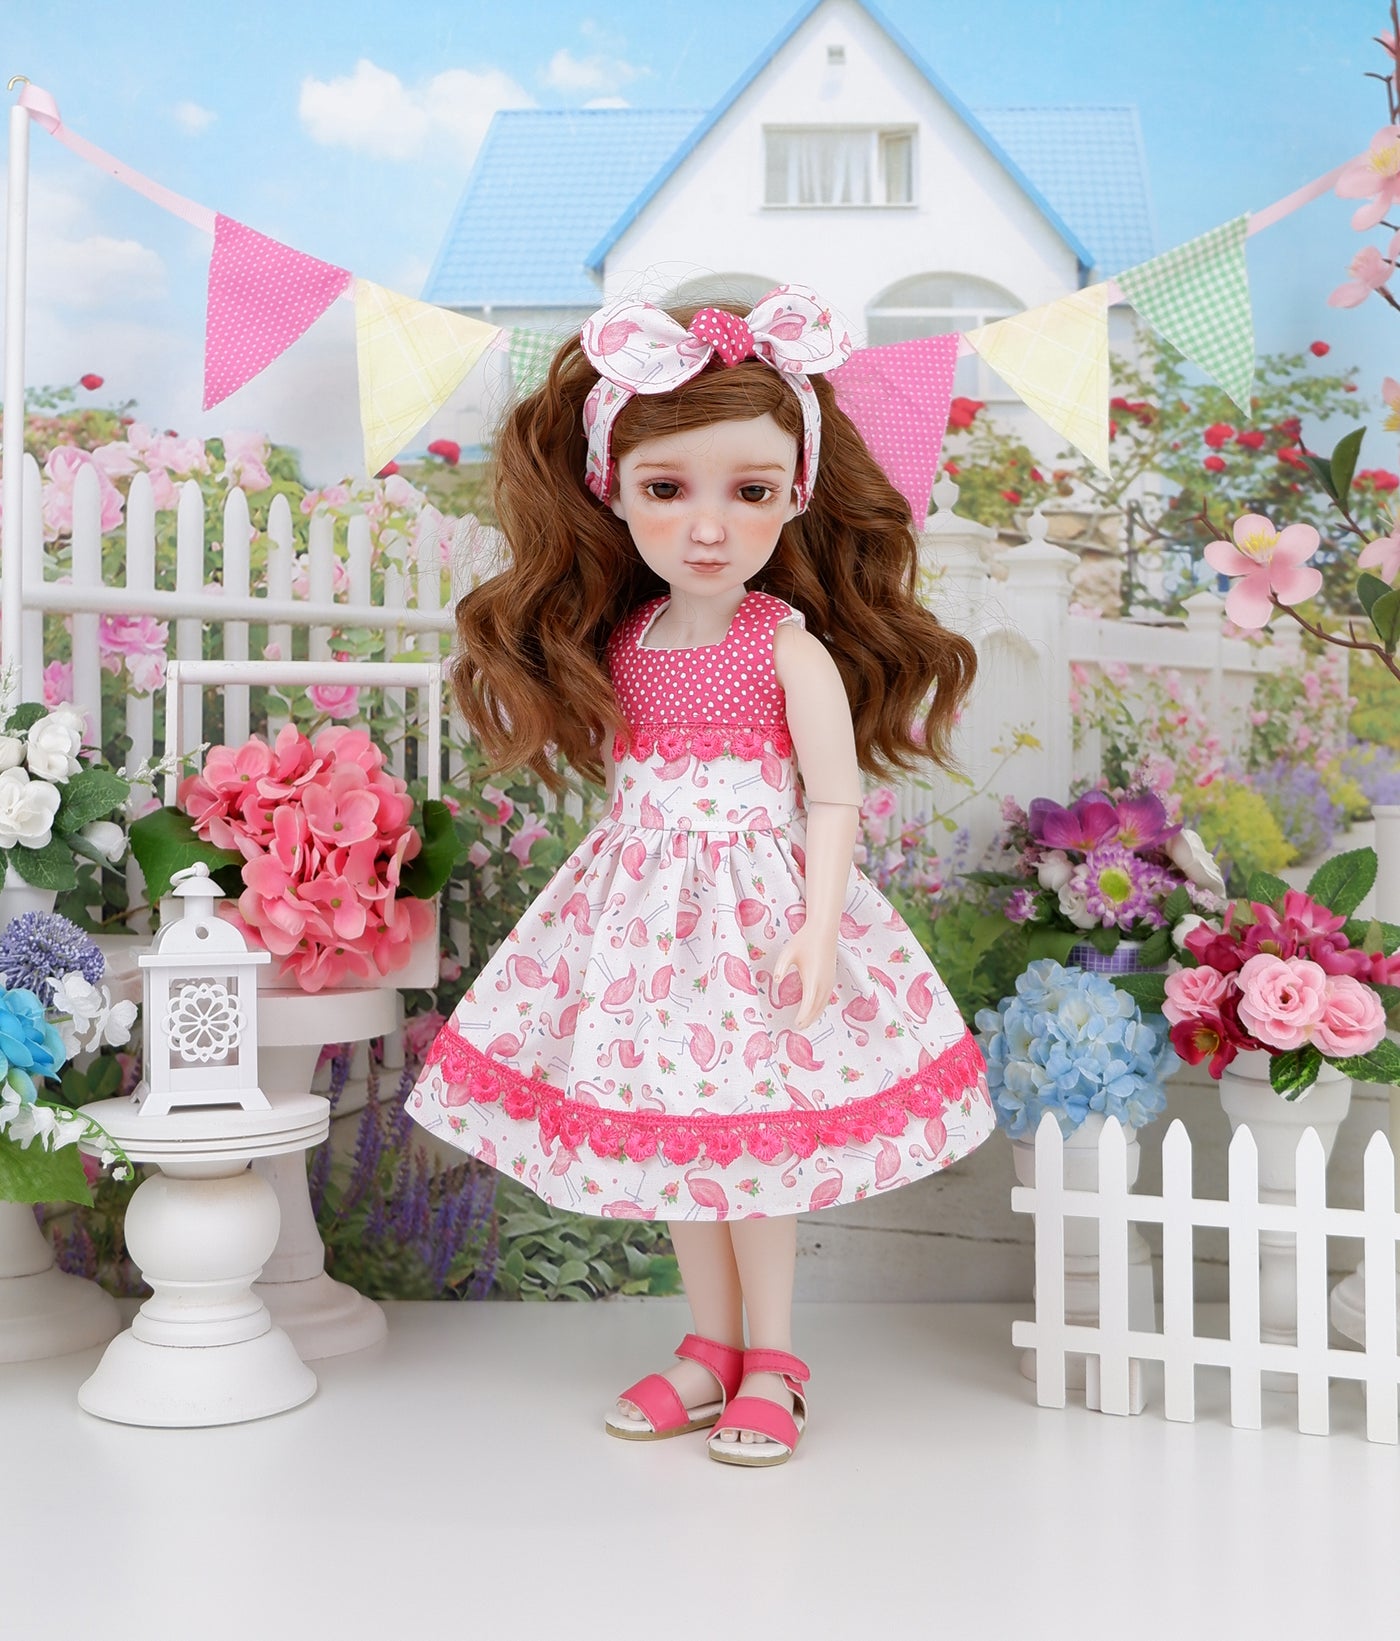 Florida Flamingo - dress and shoes for Ruby Red Fashion Friends doll